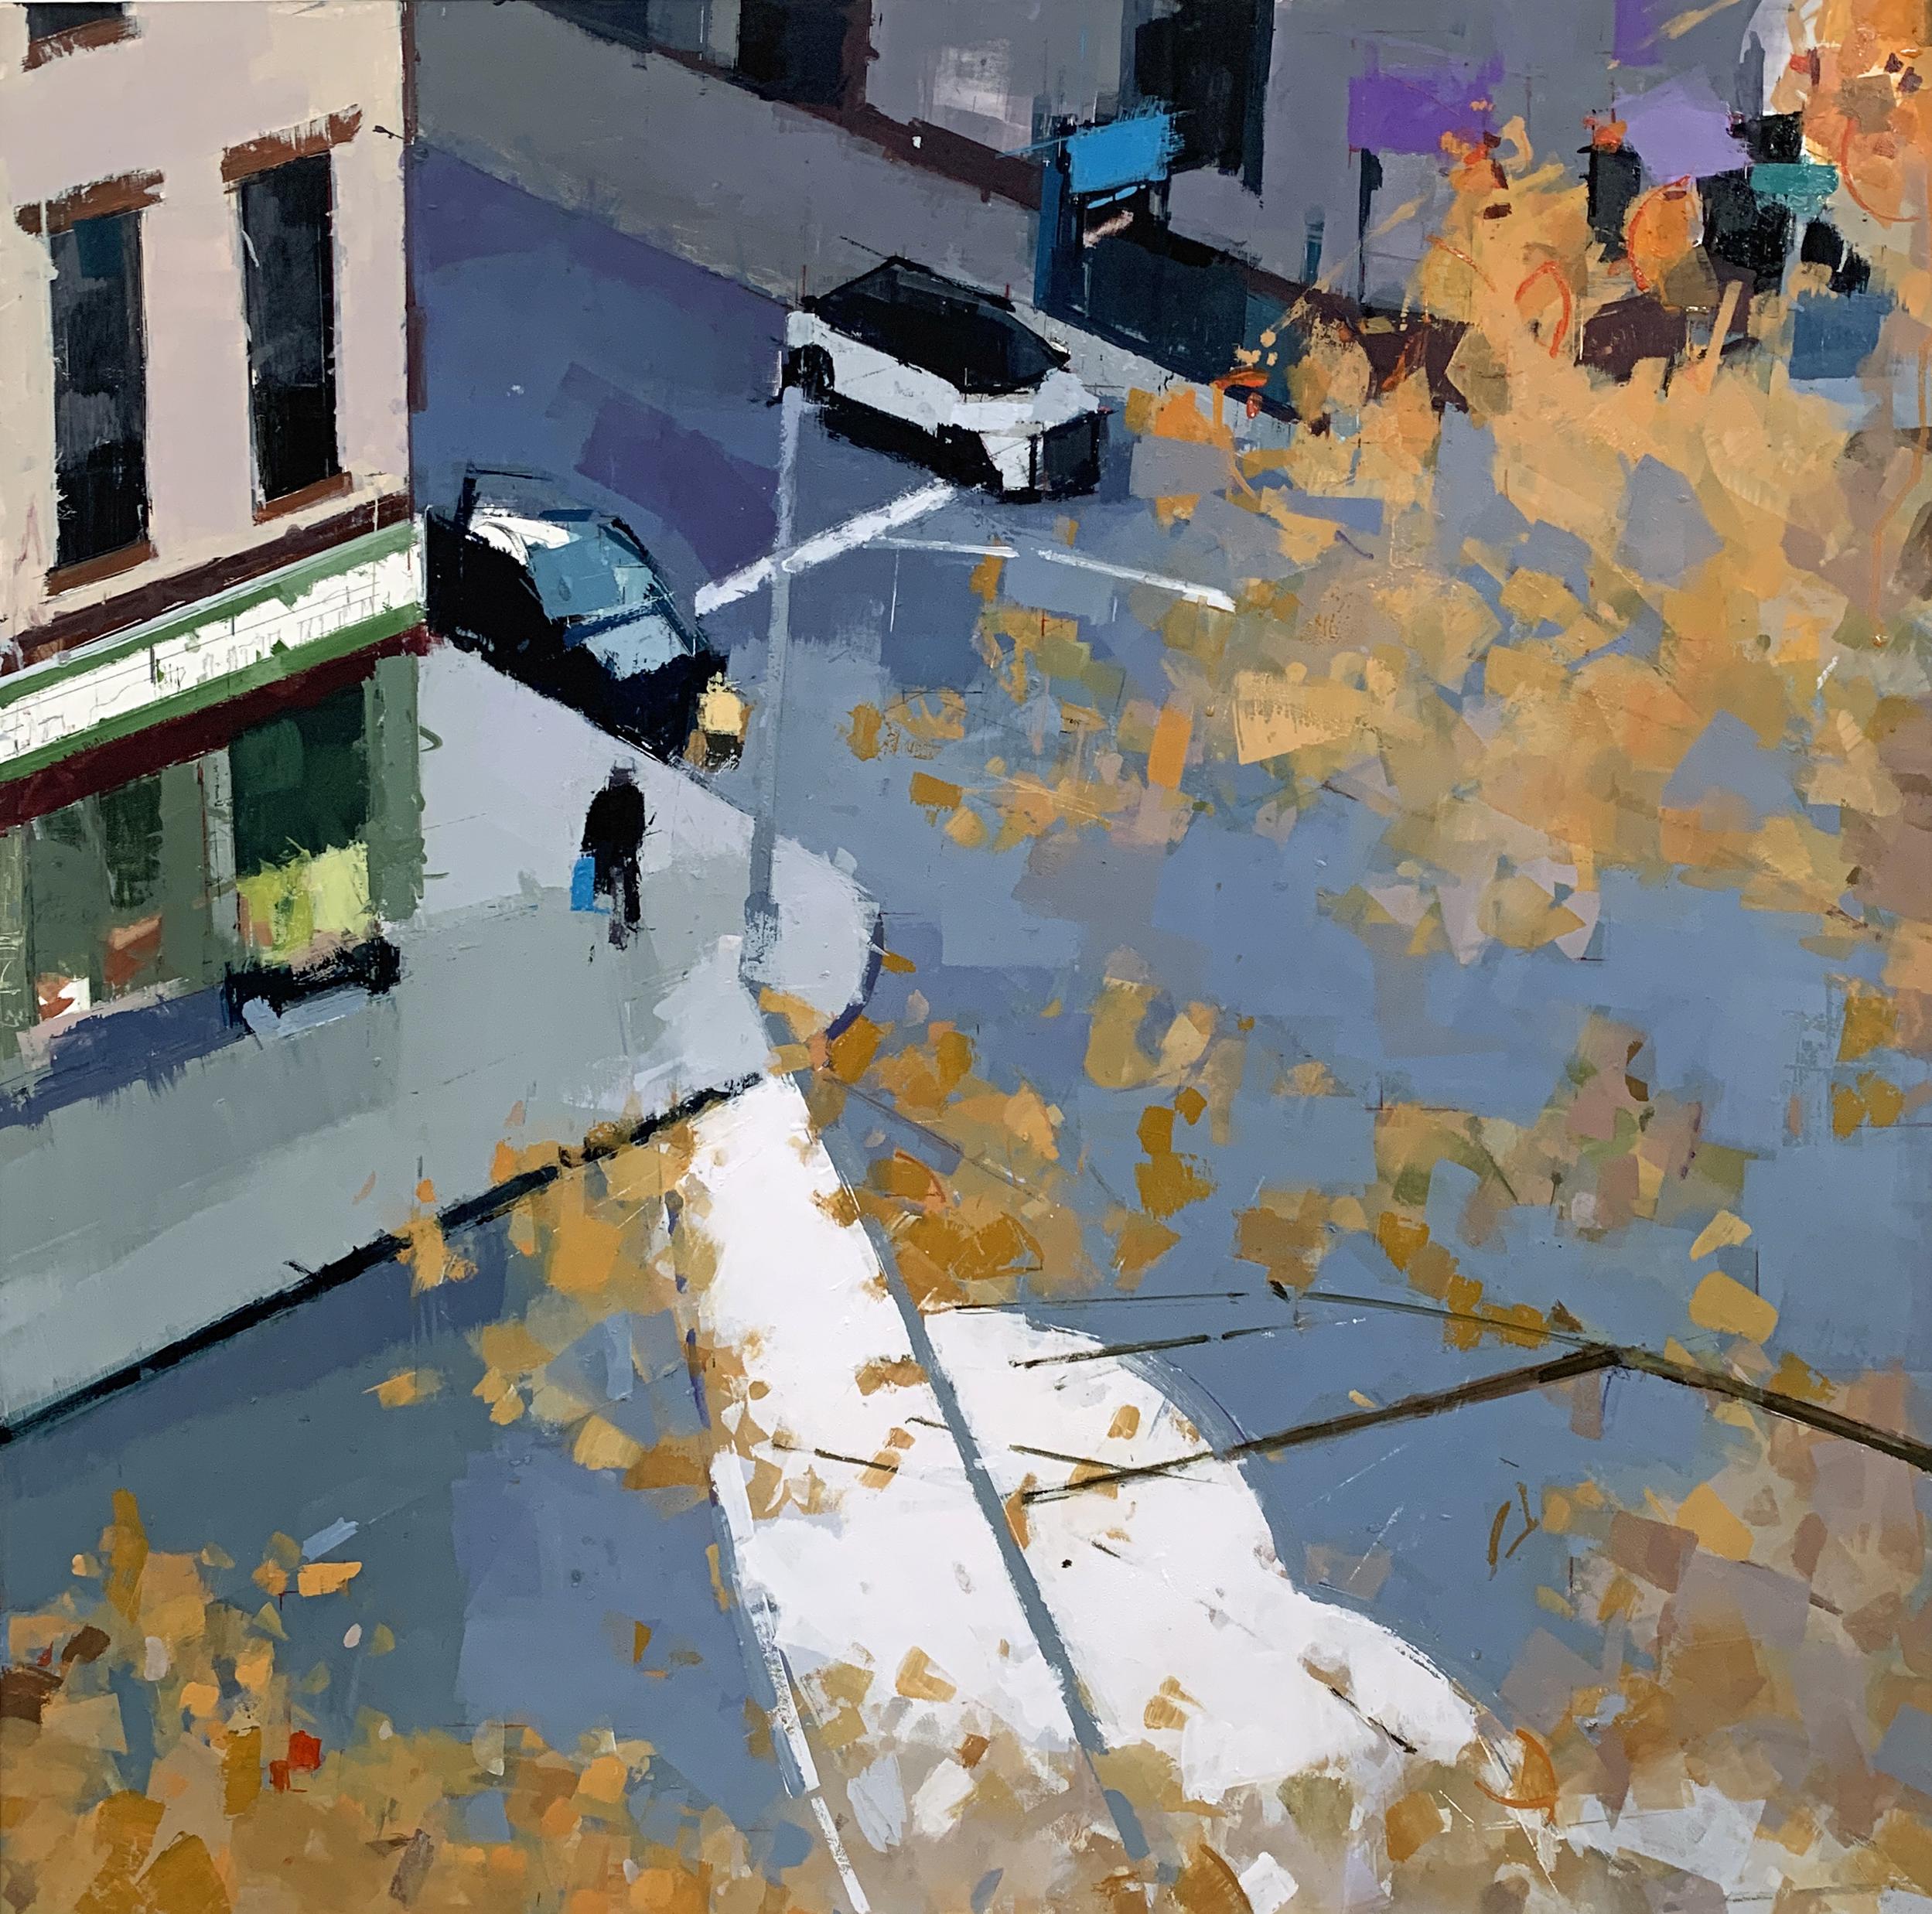 Lisa Breslow
Autumn Shadows, 2019
oil and pencil on panel
30 x 30 in.

This beautiful unique oil painting on wood panel features a New York street scene viewed from above, rendered in loose, impressionistic brushstrokes in shades of orange, blue,